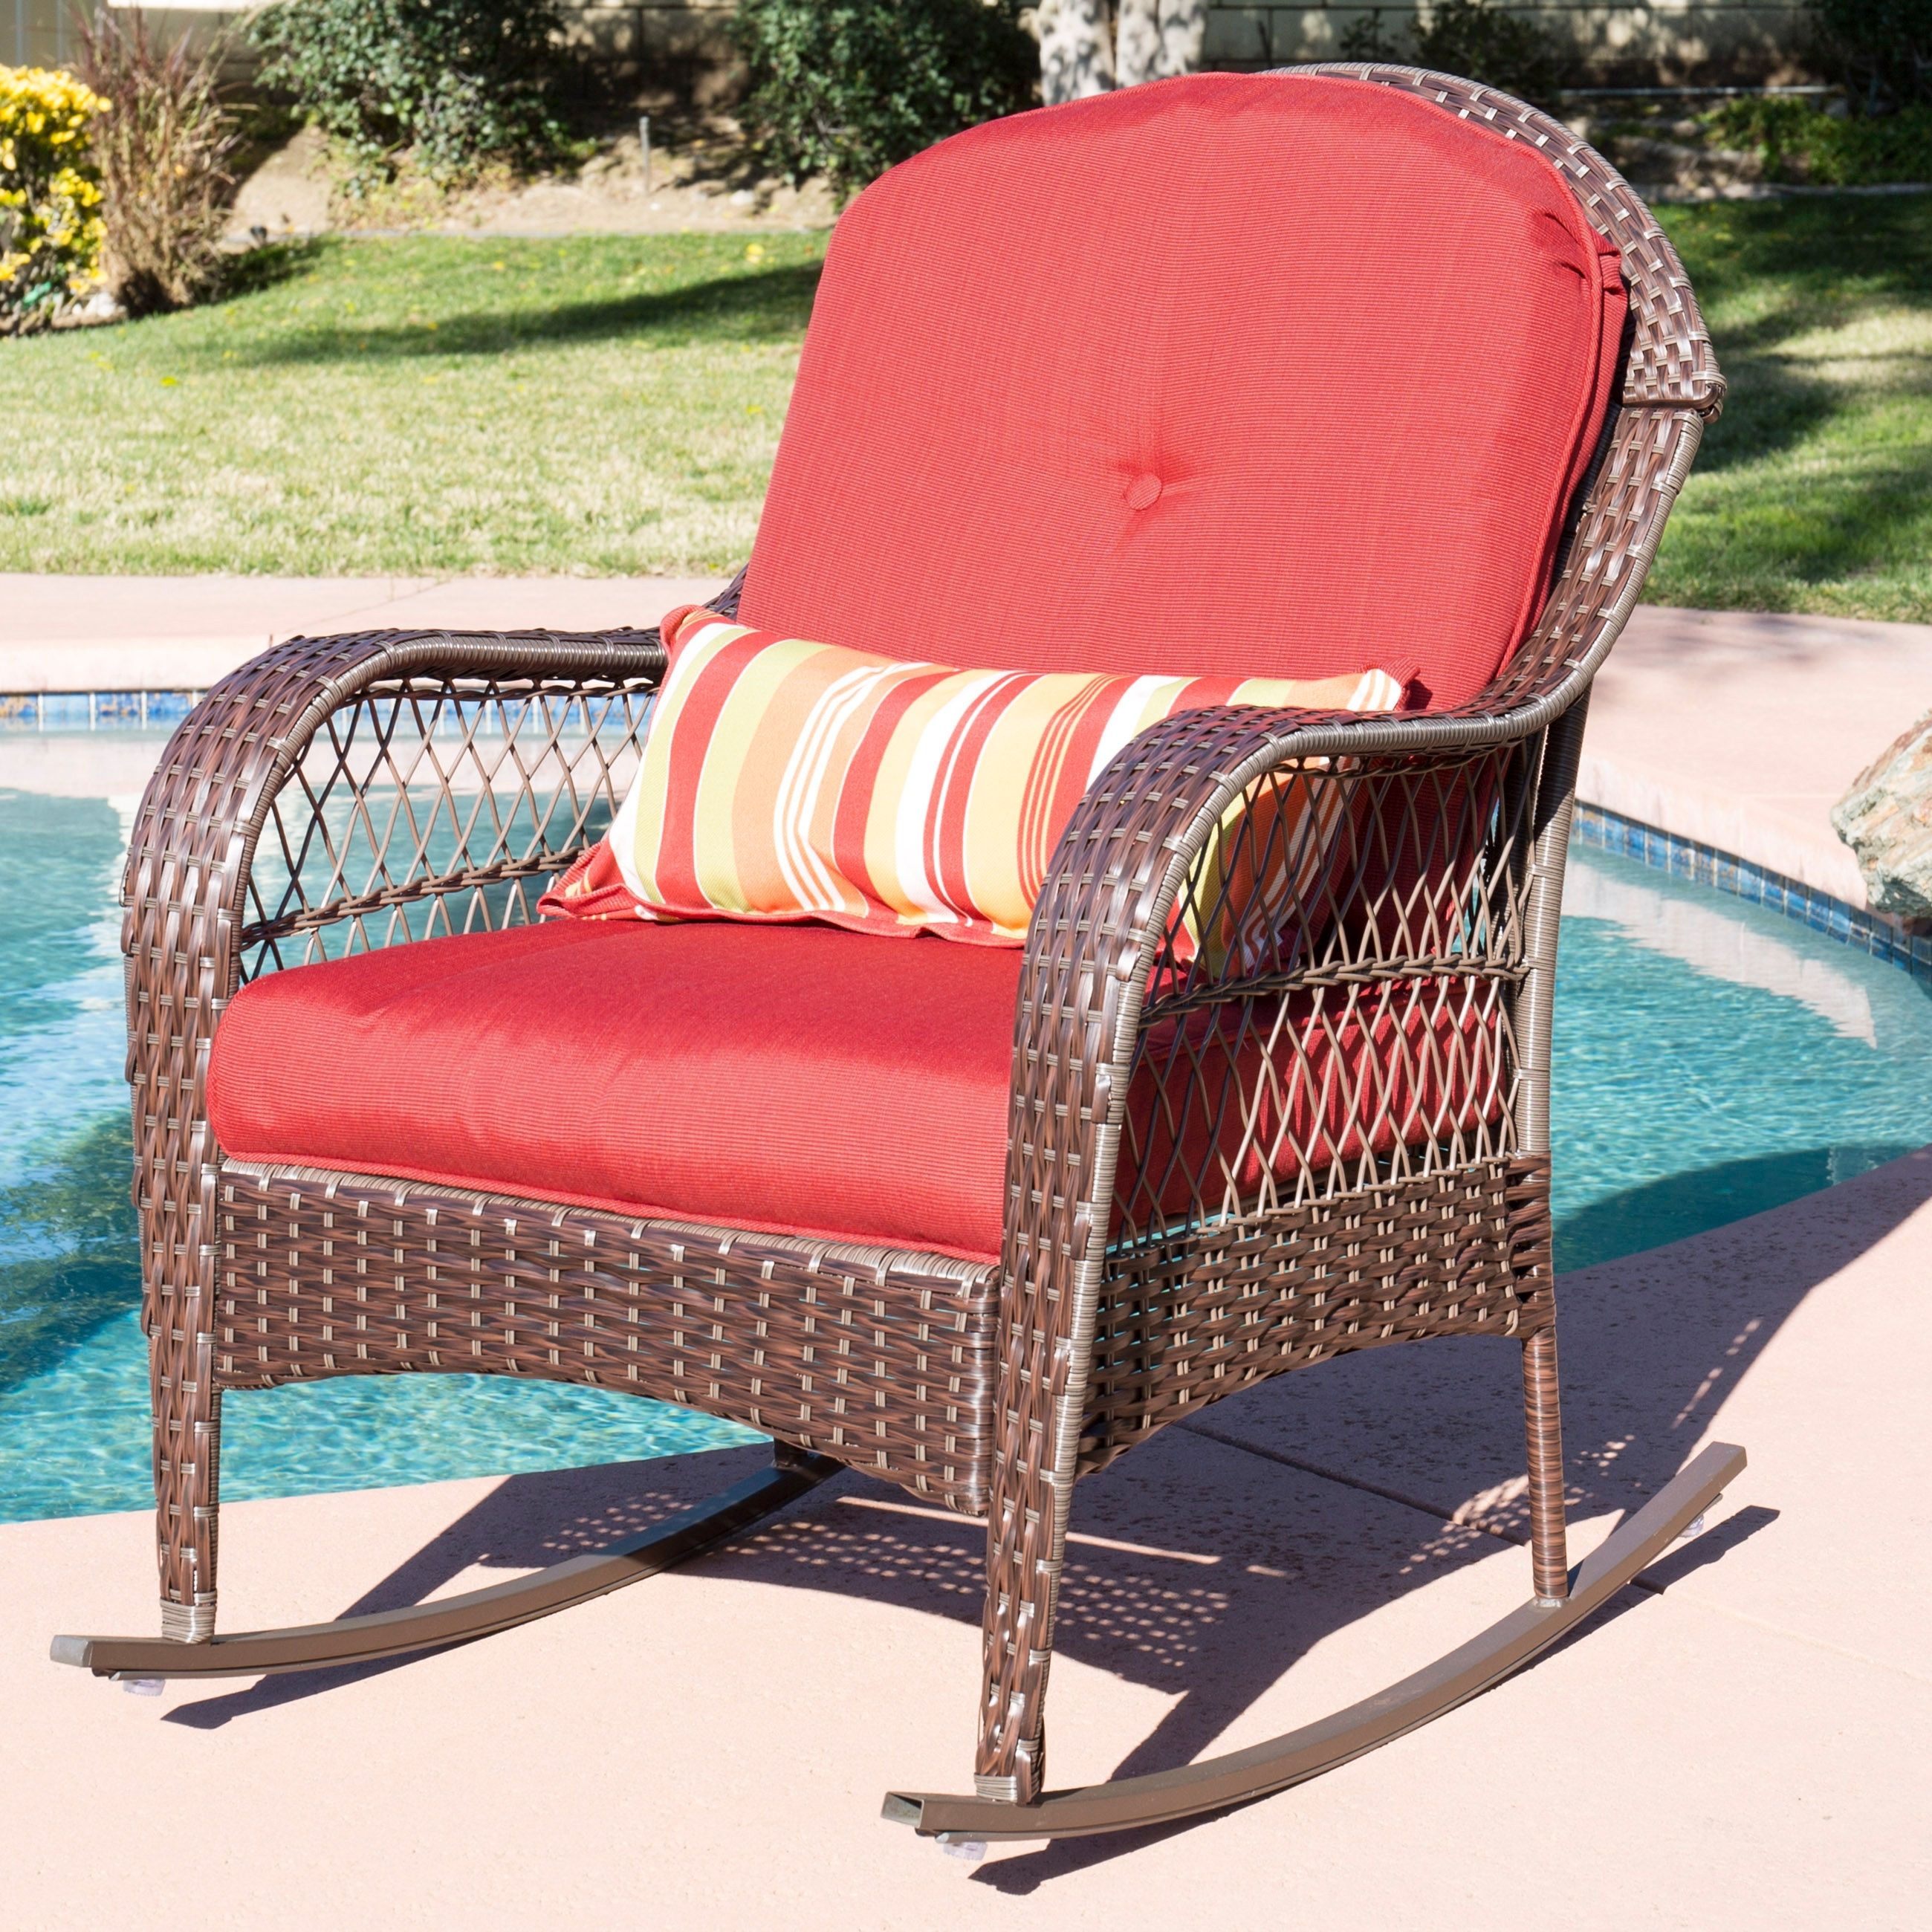 Best Choice Products Wicker Rocking Chair Patio Porch Deck Furniture Inside All Weather Patio Rocking Chairs (View 5 of 15)